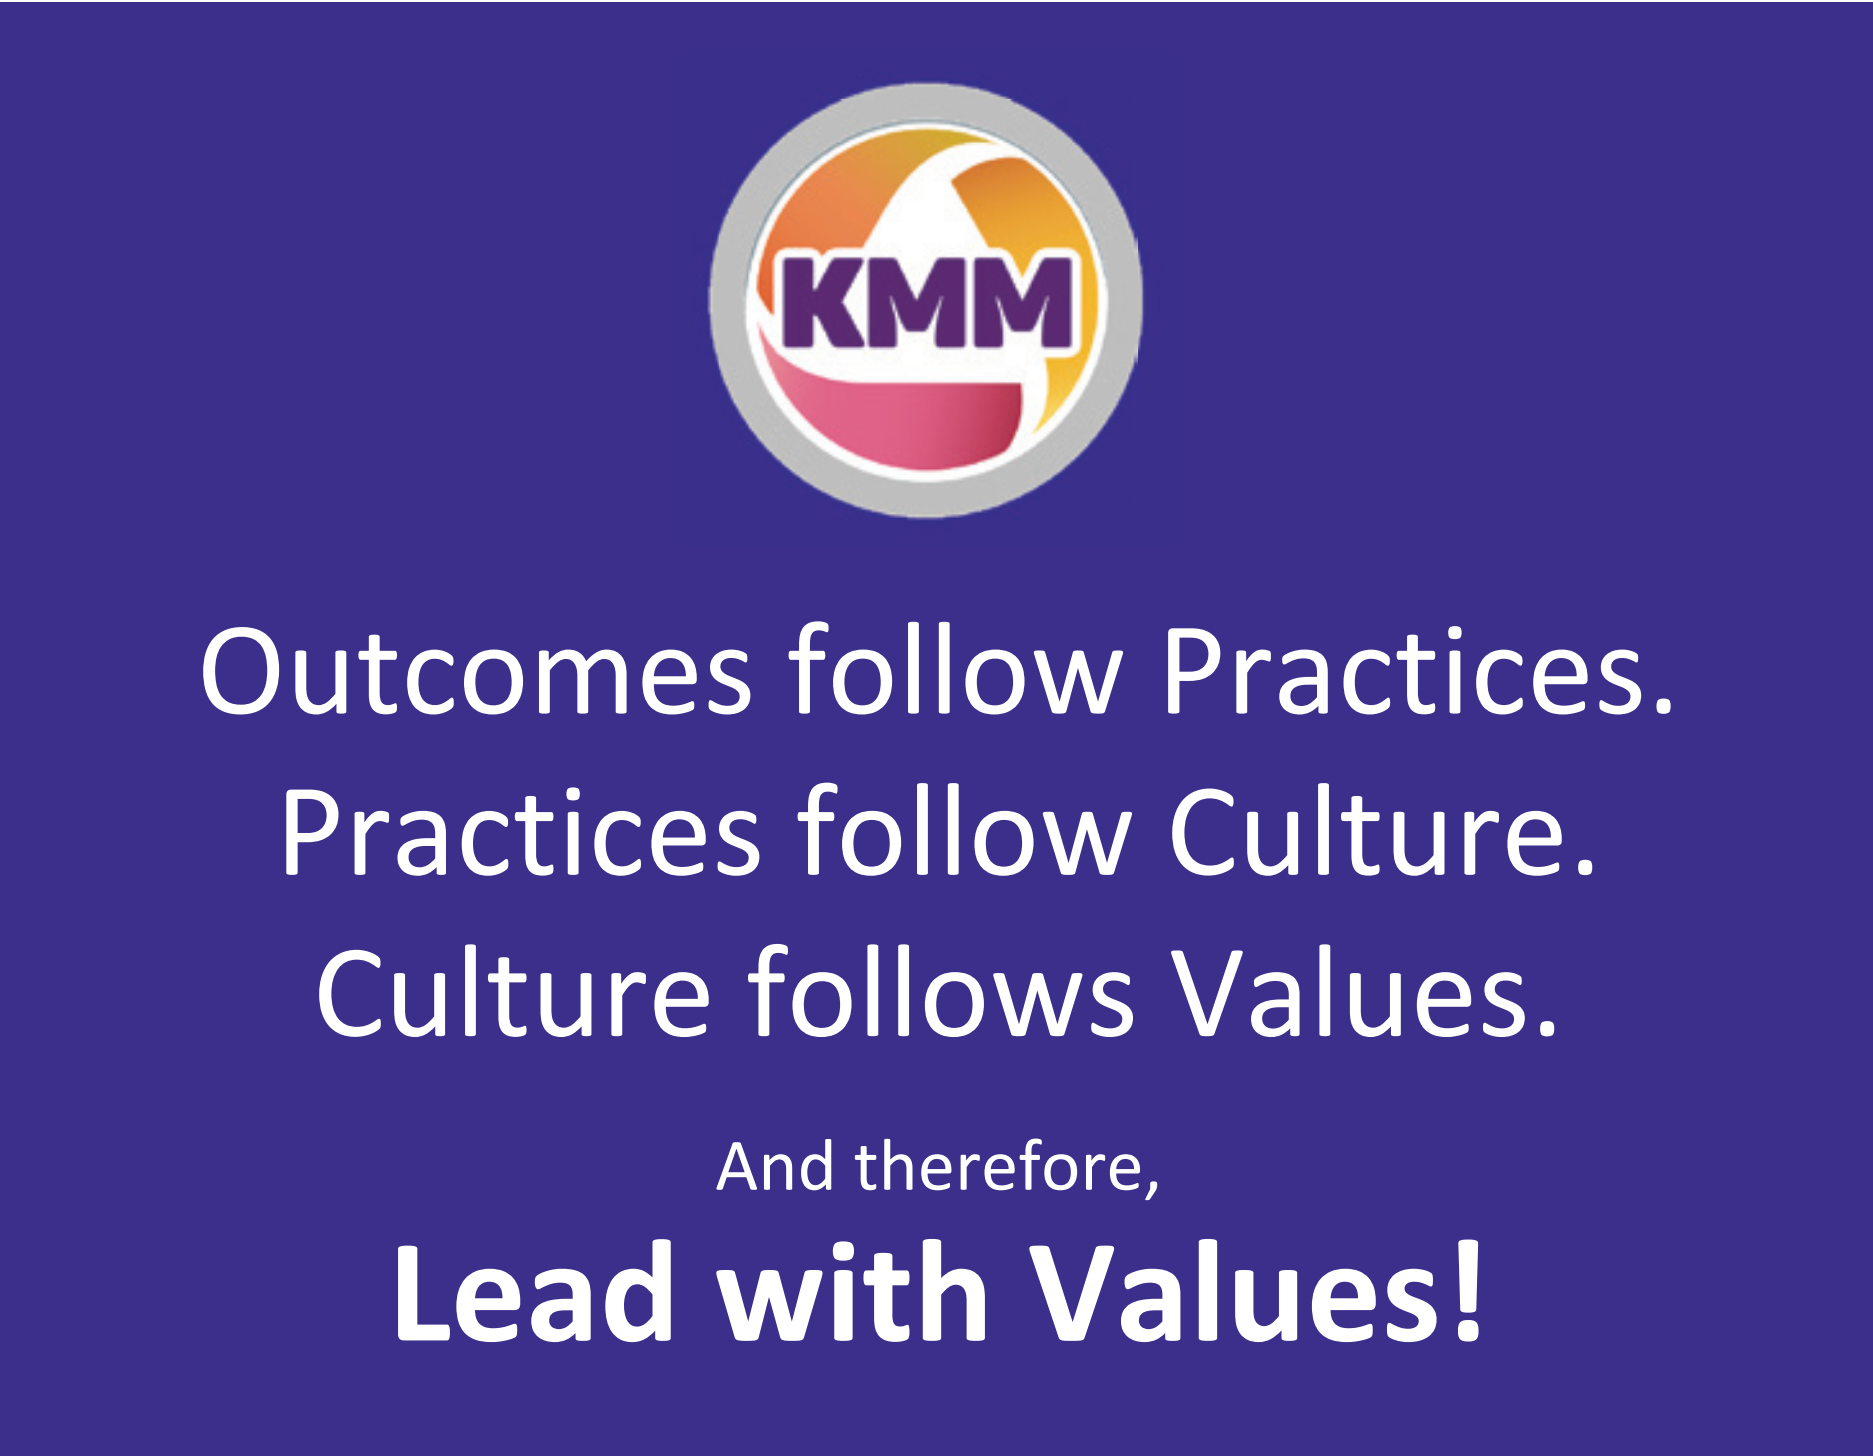 Outcomes follow Practices. Practices follow Culture. Culture follows Values. Lead with Values slogan!